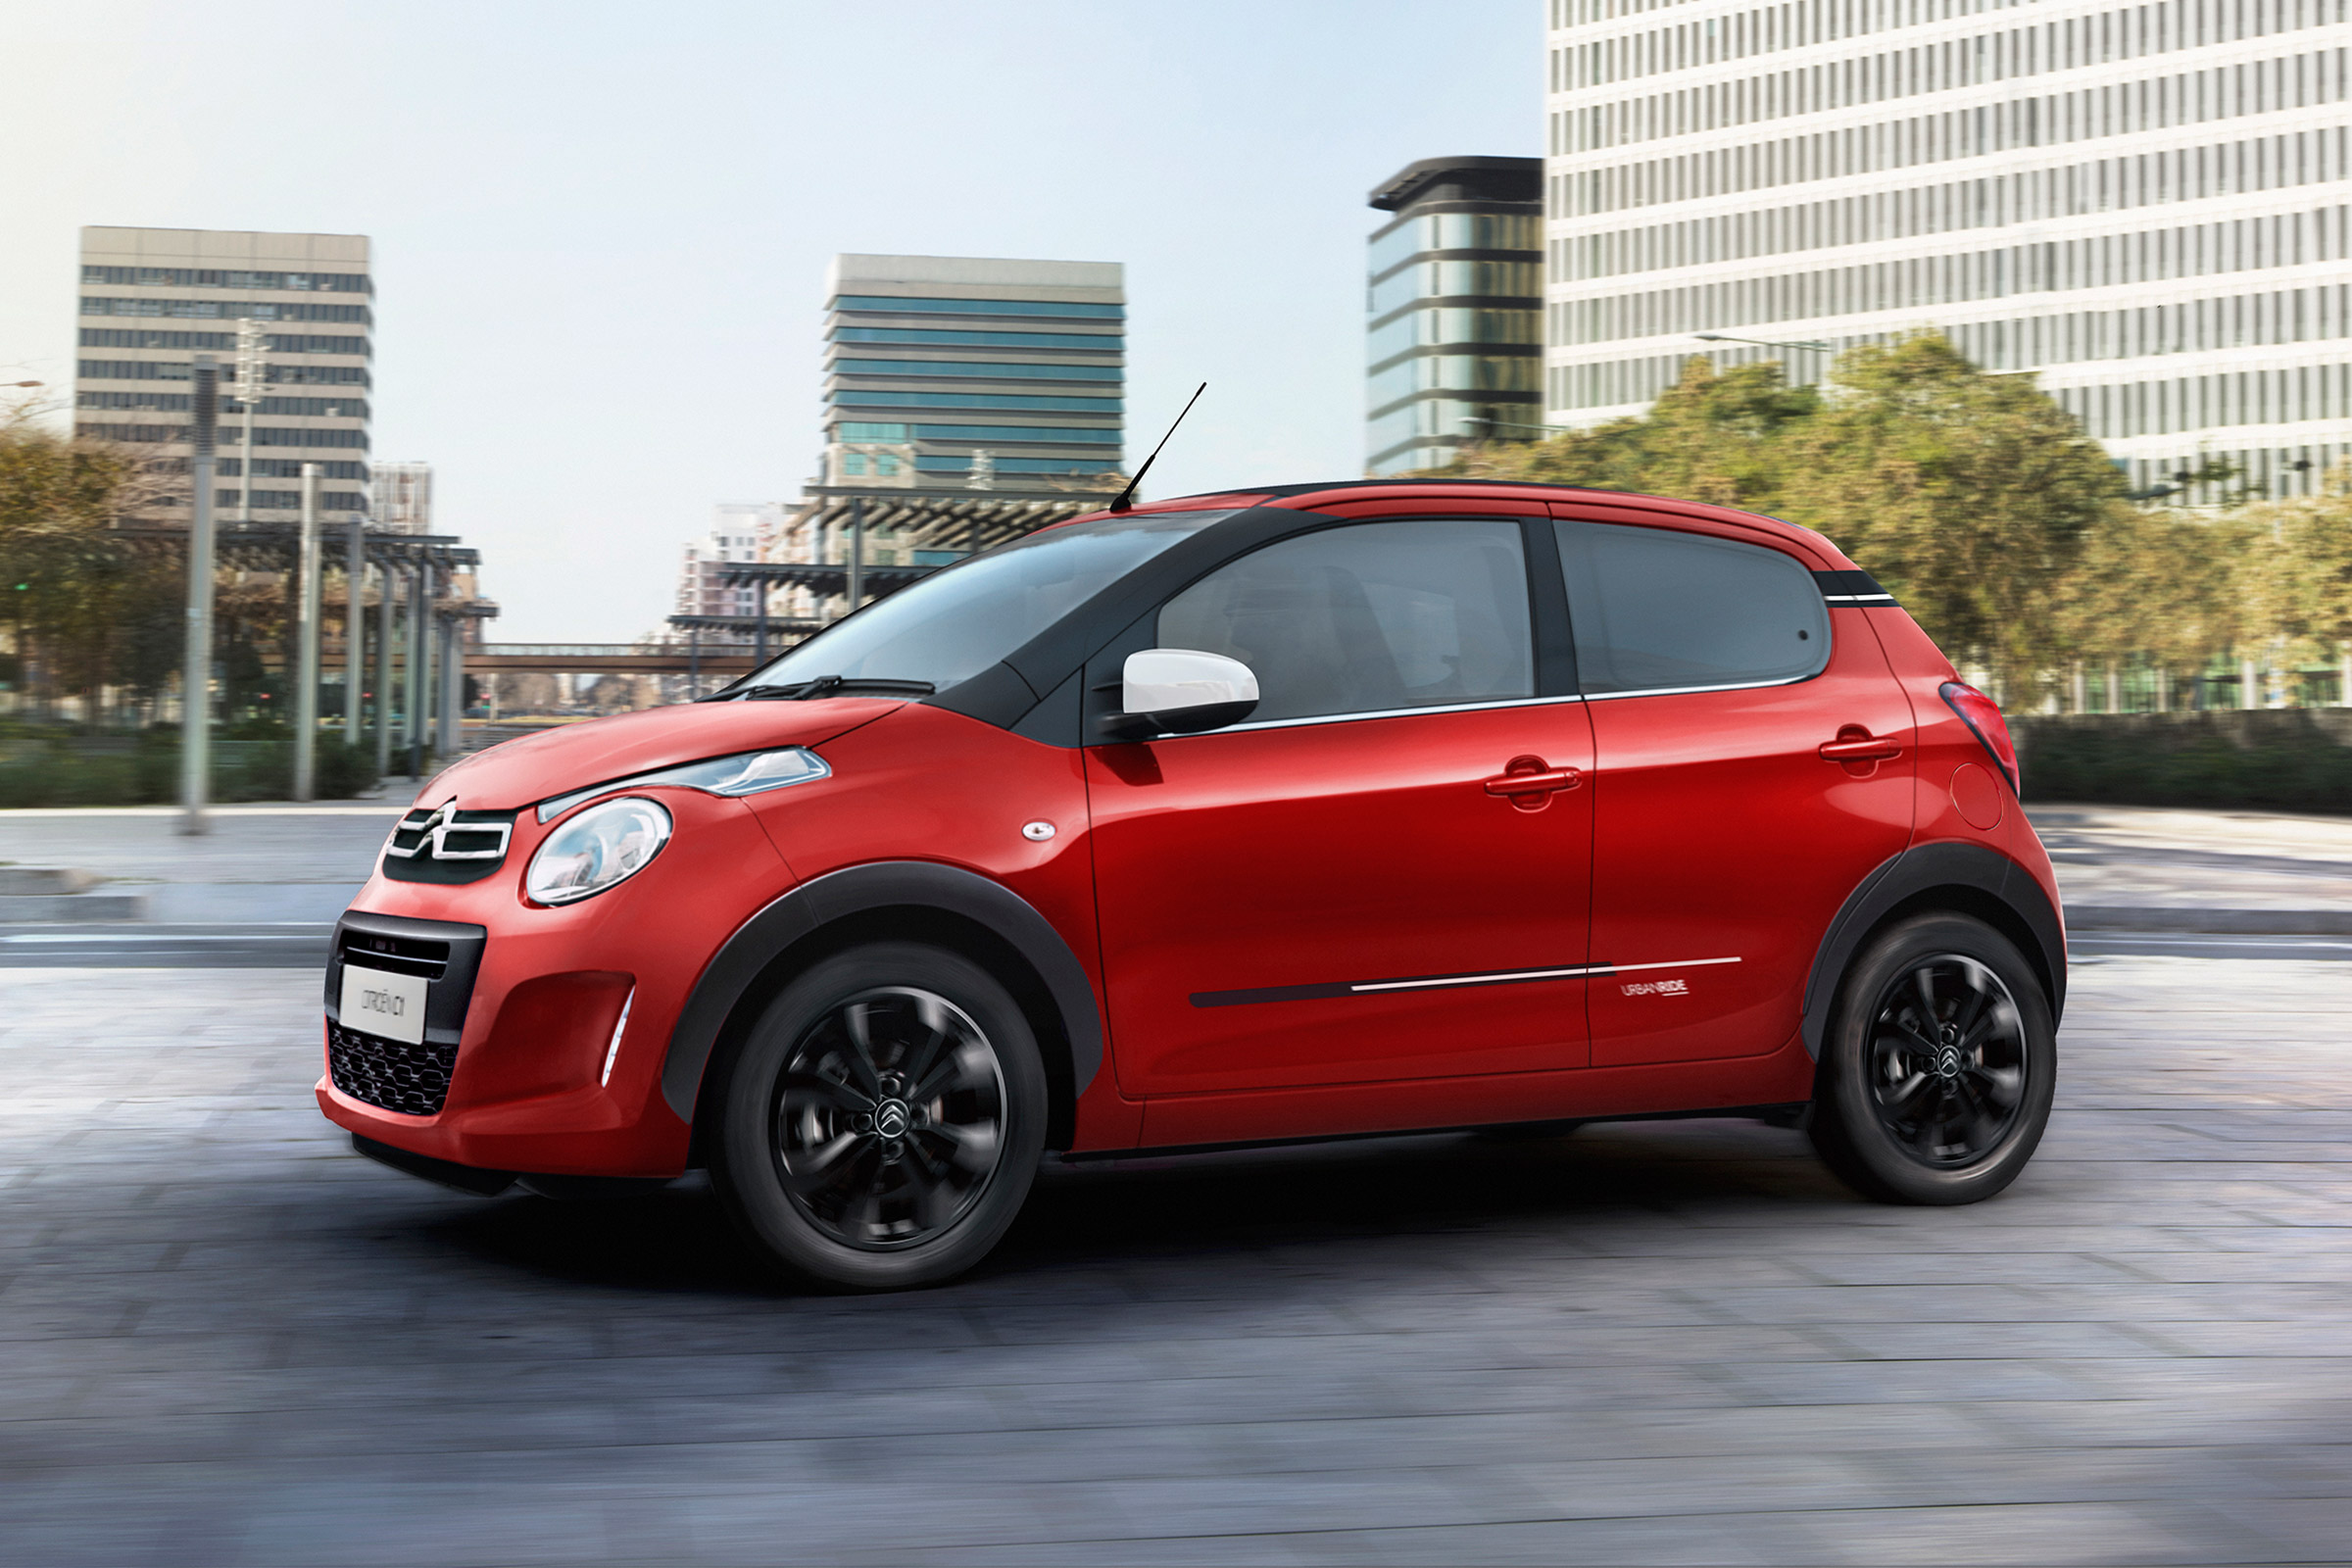 new-citroen-c1-urban-ride-special-edition-unveiled-auto-express